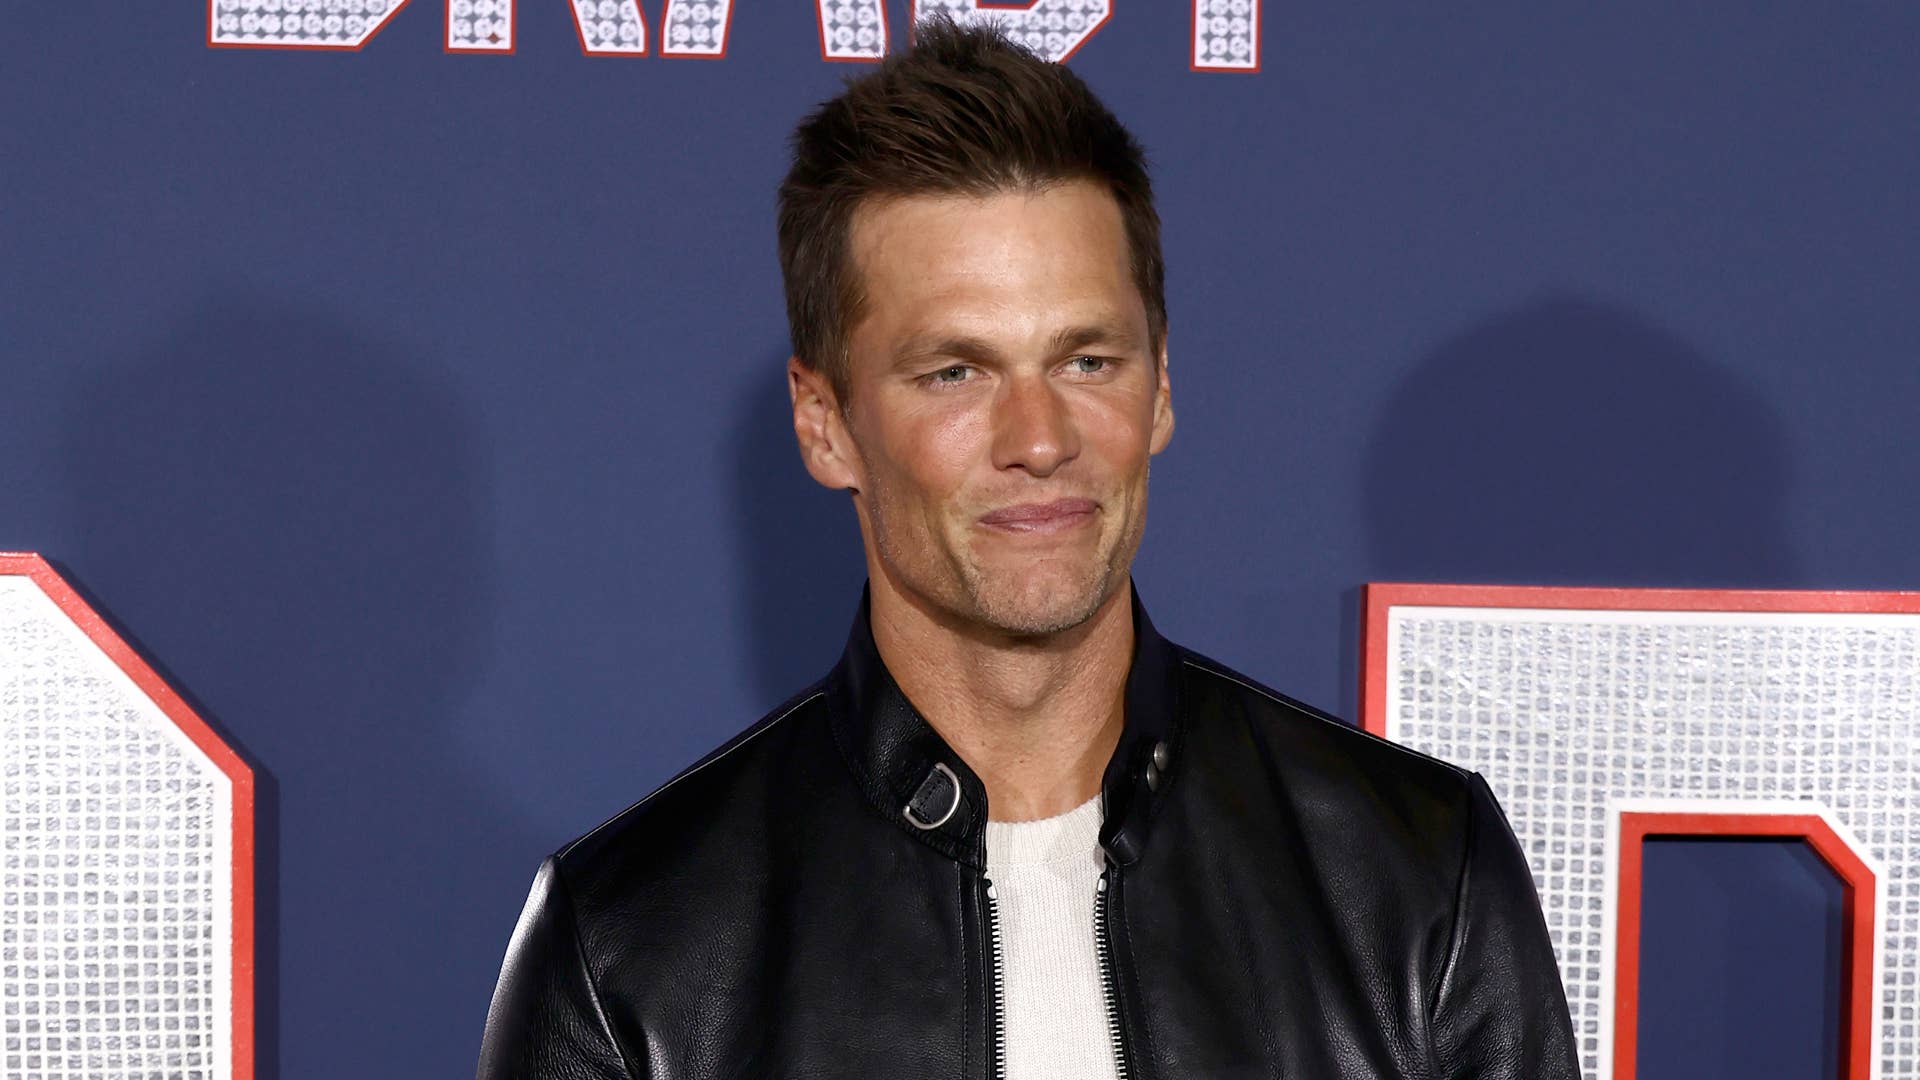 Tom Brady is seen on the red carpet